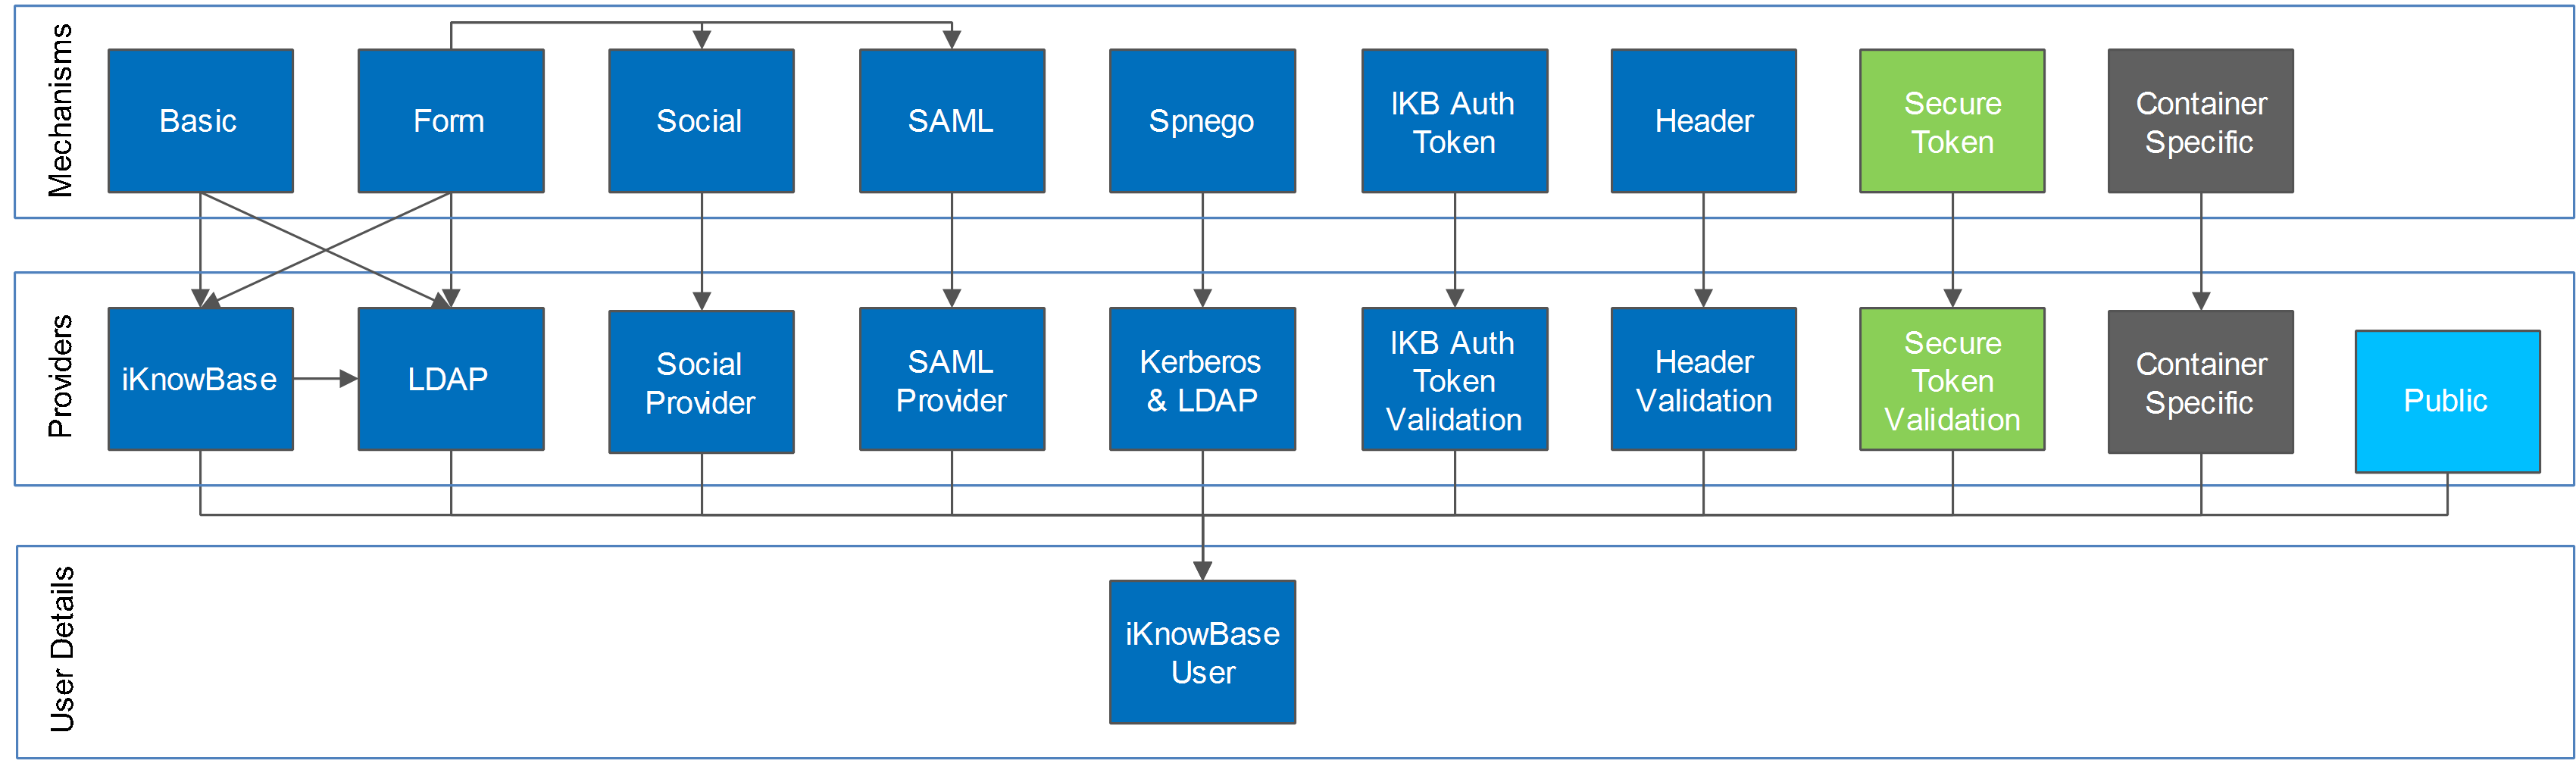 Supported Authentication Modules